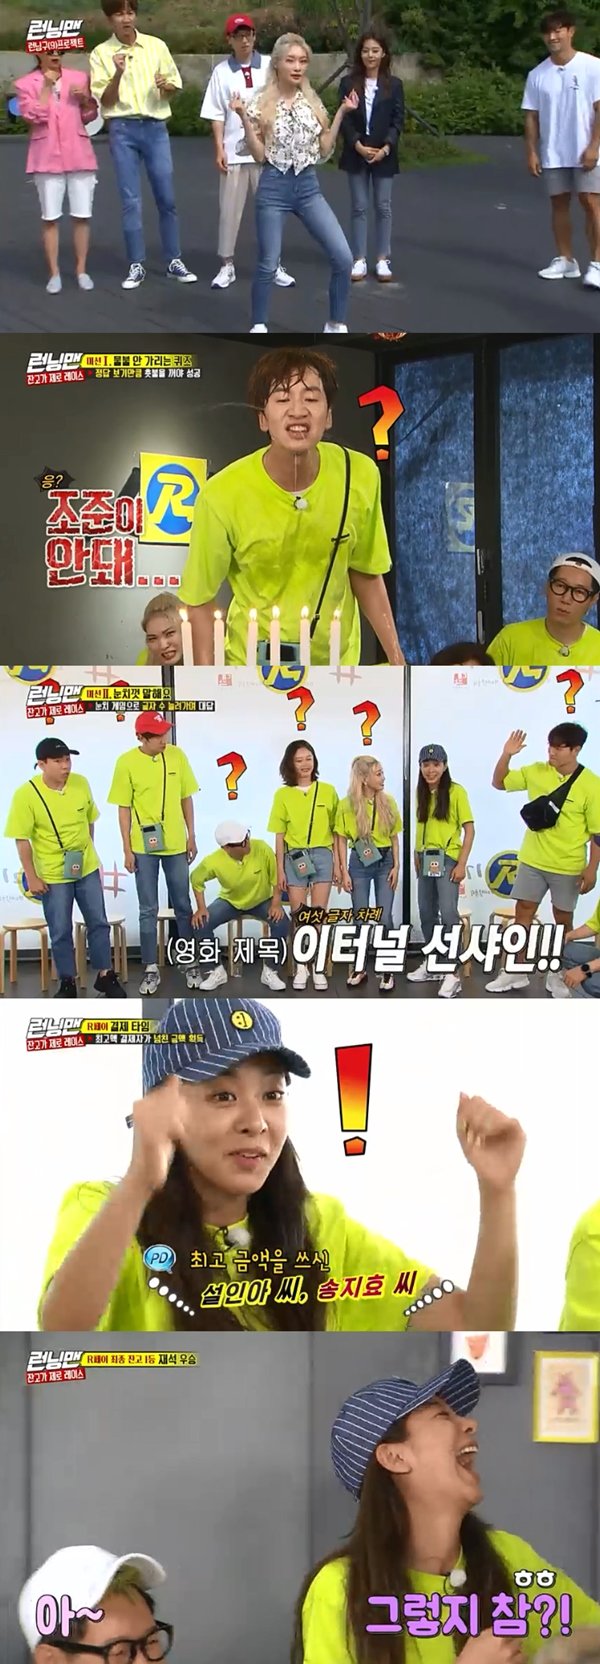 Actor Seol In-ah and singer Cheong-ha appeared as guests on SBS Running Man broadcast on the 23rd.The first mission was a quiz game that could fill the mouth with a water gun and then turn off the candle.Kim Jong-kook was impressed by the strange technique of water shooting through his mouth and using water pressure after filling his mouth.But the next Top Model request failed to turn off the fire because of weak water pressure; the photon benchmarked Kim Jong-kooks method, but its accuracy fell.Kim Jong-kook and Yang Se-chan team changed roles and did Top Model; Yang Se-chan boasted a huge amount of water storage, although accuracy was low.The first problem was taken by Kim Jong-kook and Yang Se-chan.In payment time, Jeon So-min was paid to take the difference, but it was a loss, and Song Ji-hyo, who did not pay any, benefited.The second mission game was Tell me the best. I had to answer the orderly number of letters while playing the game.As the number of letters became longer and more disadvantageous, Sul In-ah laughed when he told Cheong-ha that he wanted to nickname him Eternal Sunshine.Finally, Cheongha and Kim Jong-kook survived and won the meal ticket.The second round question was a funny movie. Kim Jong-kook and Seol In-ah both shouted Predator in the fourth letter.The members laughed at Kim Jong-kook and Seol In-ah, who doubted that they had seen each other.At the second payment time, Haha and Lee Kwang-soo did not pay the money, but the payment amount exceeded 10,000 won.The person who didnt pay was the benefit.In the third game, all Running Man members became victims of the makeup; they could not avoid the unusual hats, and their faces were full of makeup.When all lost hope, Yoo Jae-Suk hit the center and succeeded in the mission and became the final mission winner.Yoo Jae-Suk decided to dine with Jeon So-min and Song Ji-hyo.